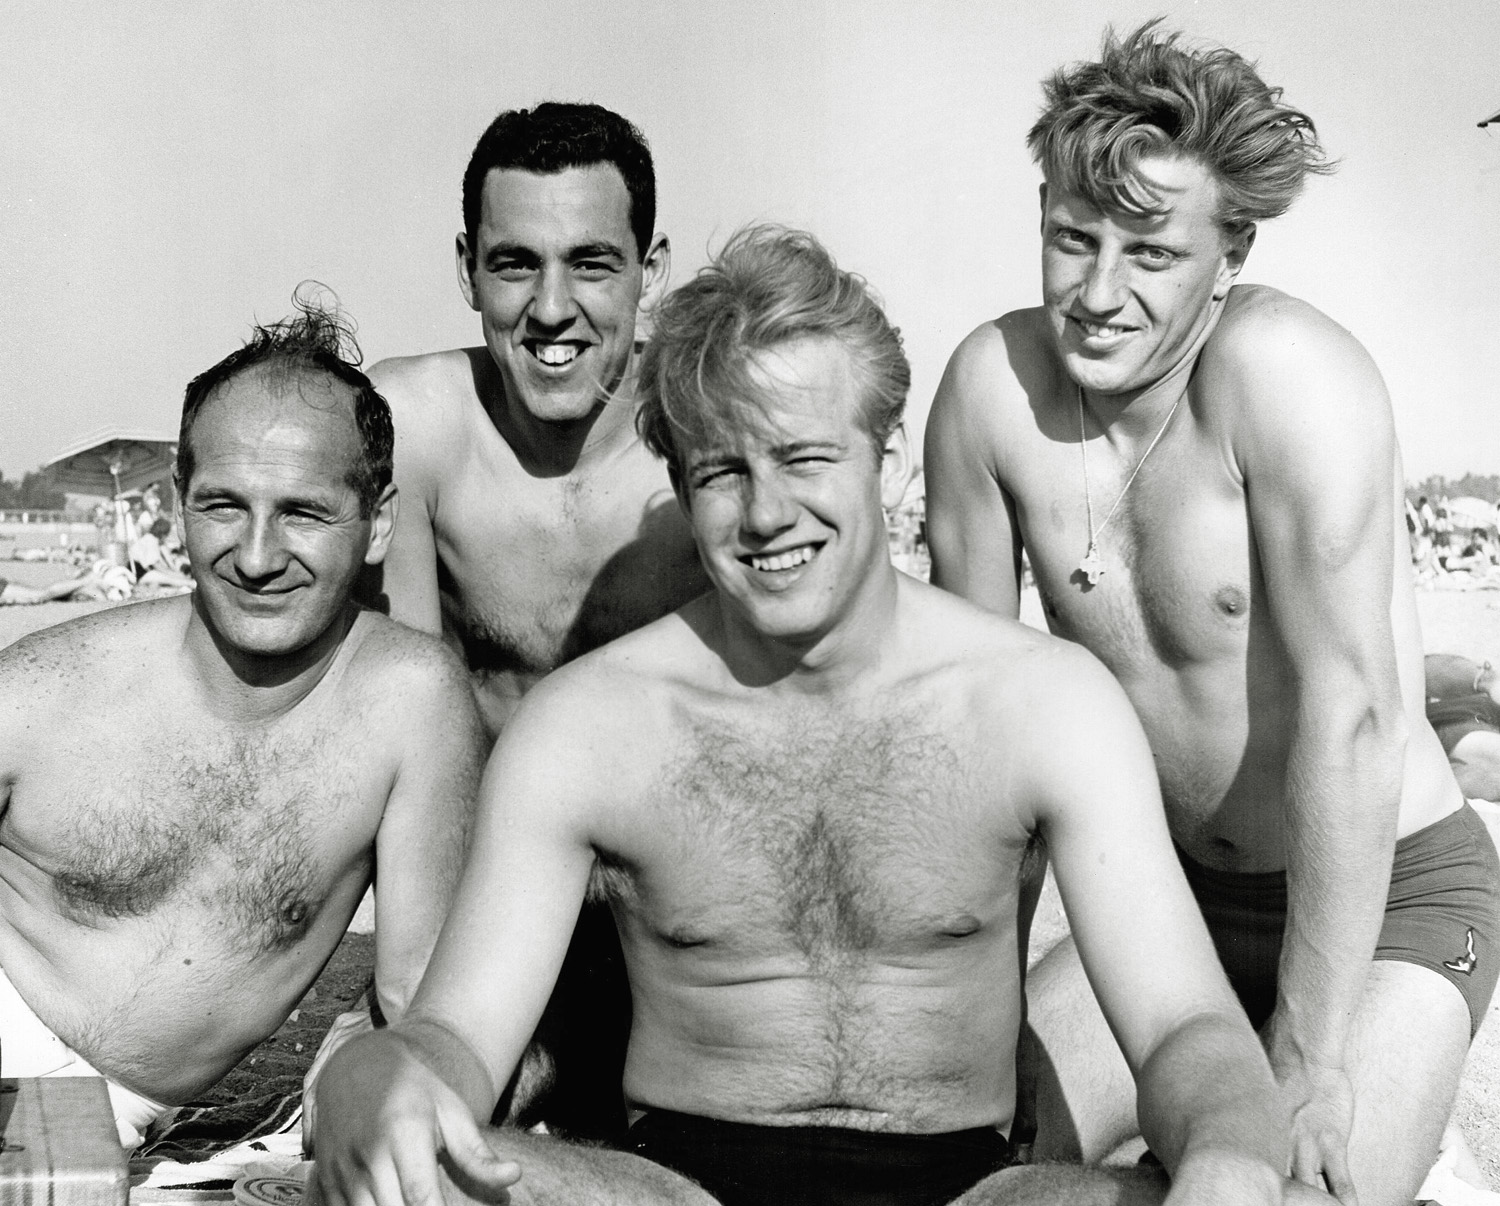 Detroit Navy buddies after military duty. Photographed at Metropolitan Beach, St. Clair Shoes, Michigan, summer 1954 by Shegoi. View full size.